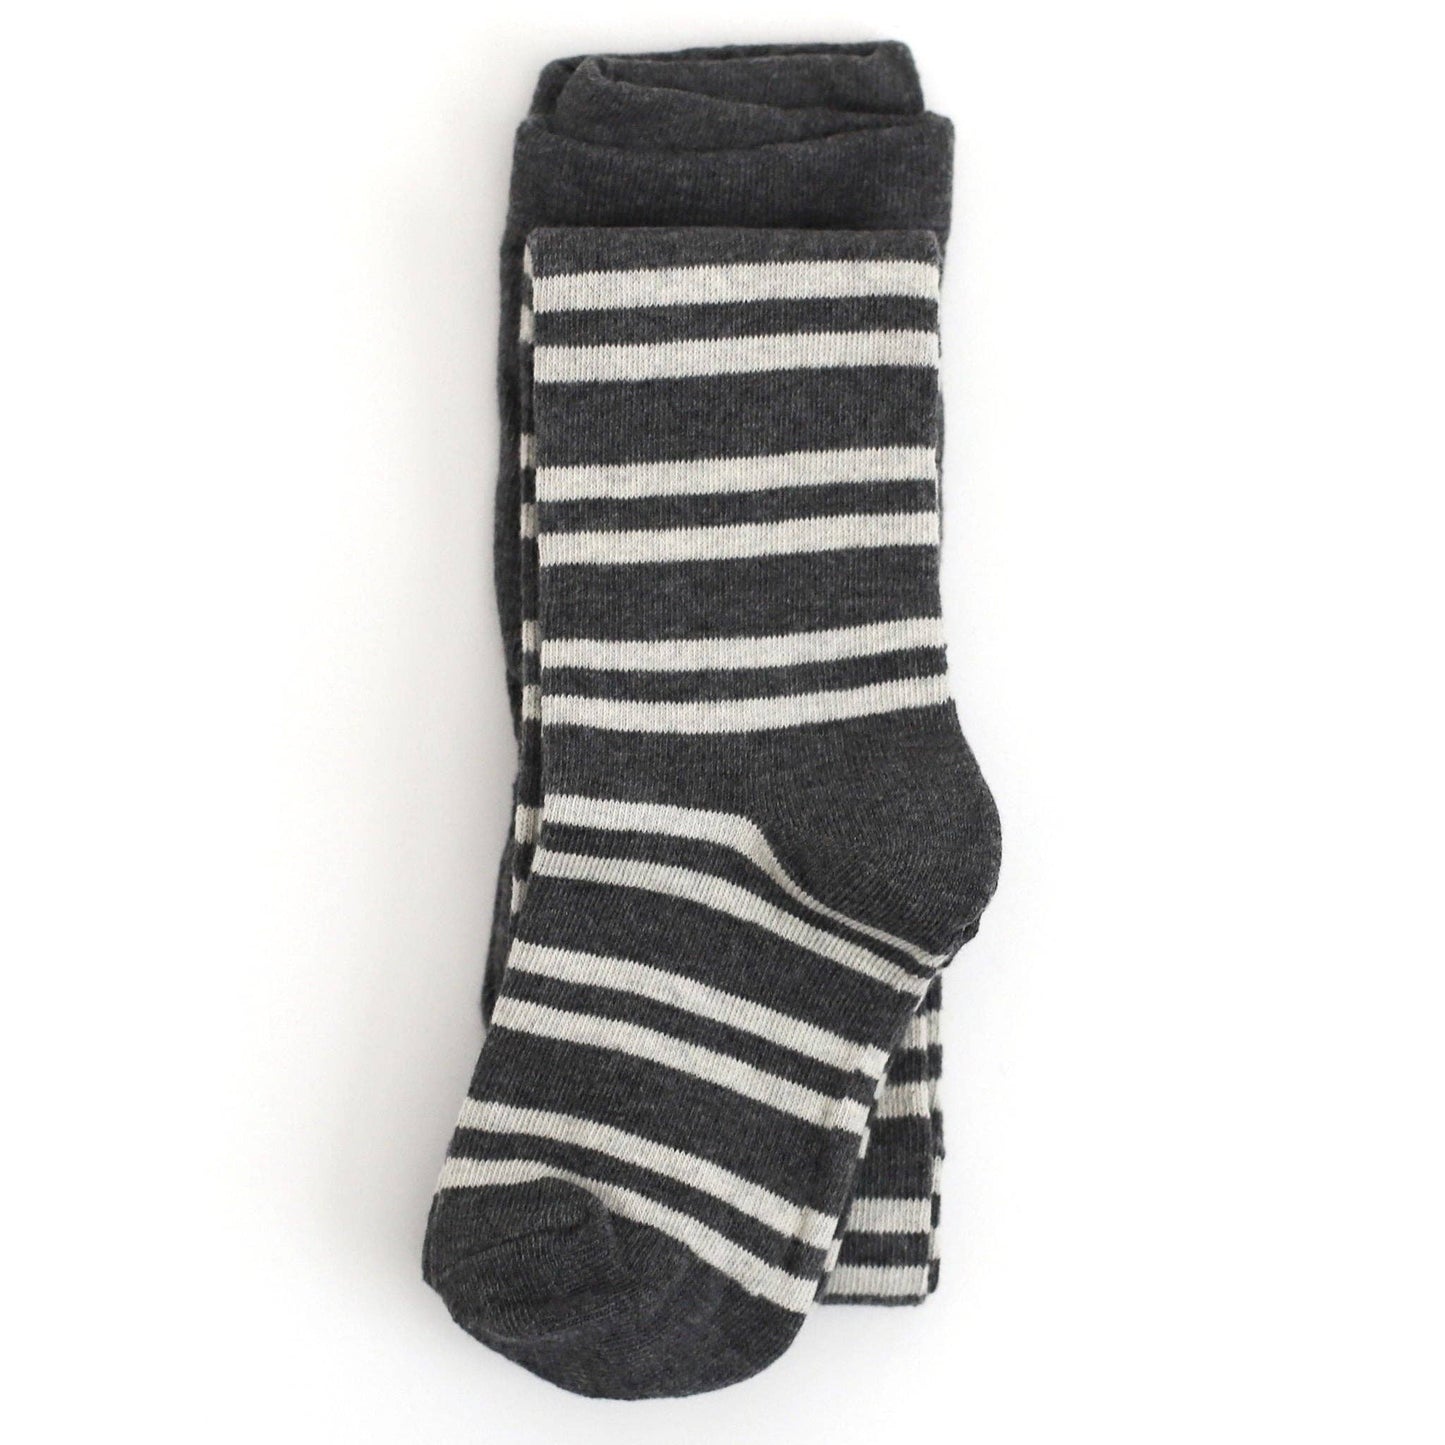 Little Stocking Co. - Charcoal Striped Knit Tights: 1-2 YEARS